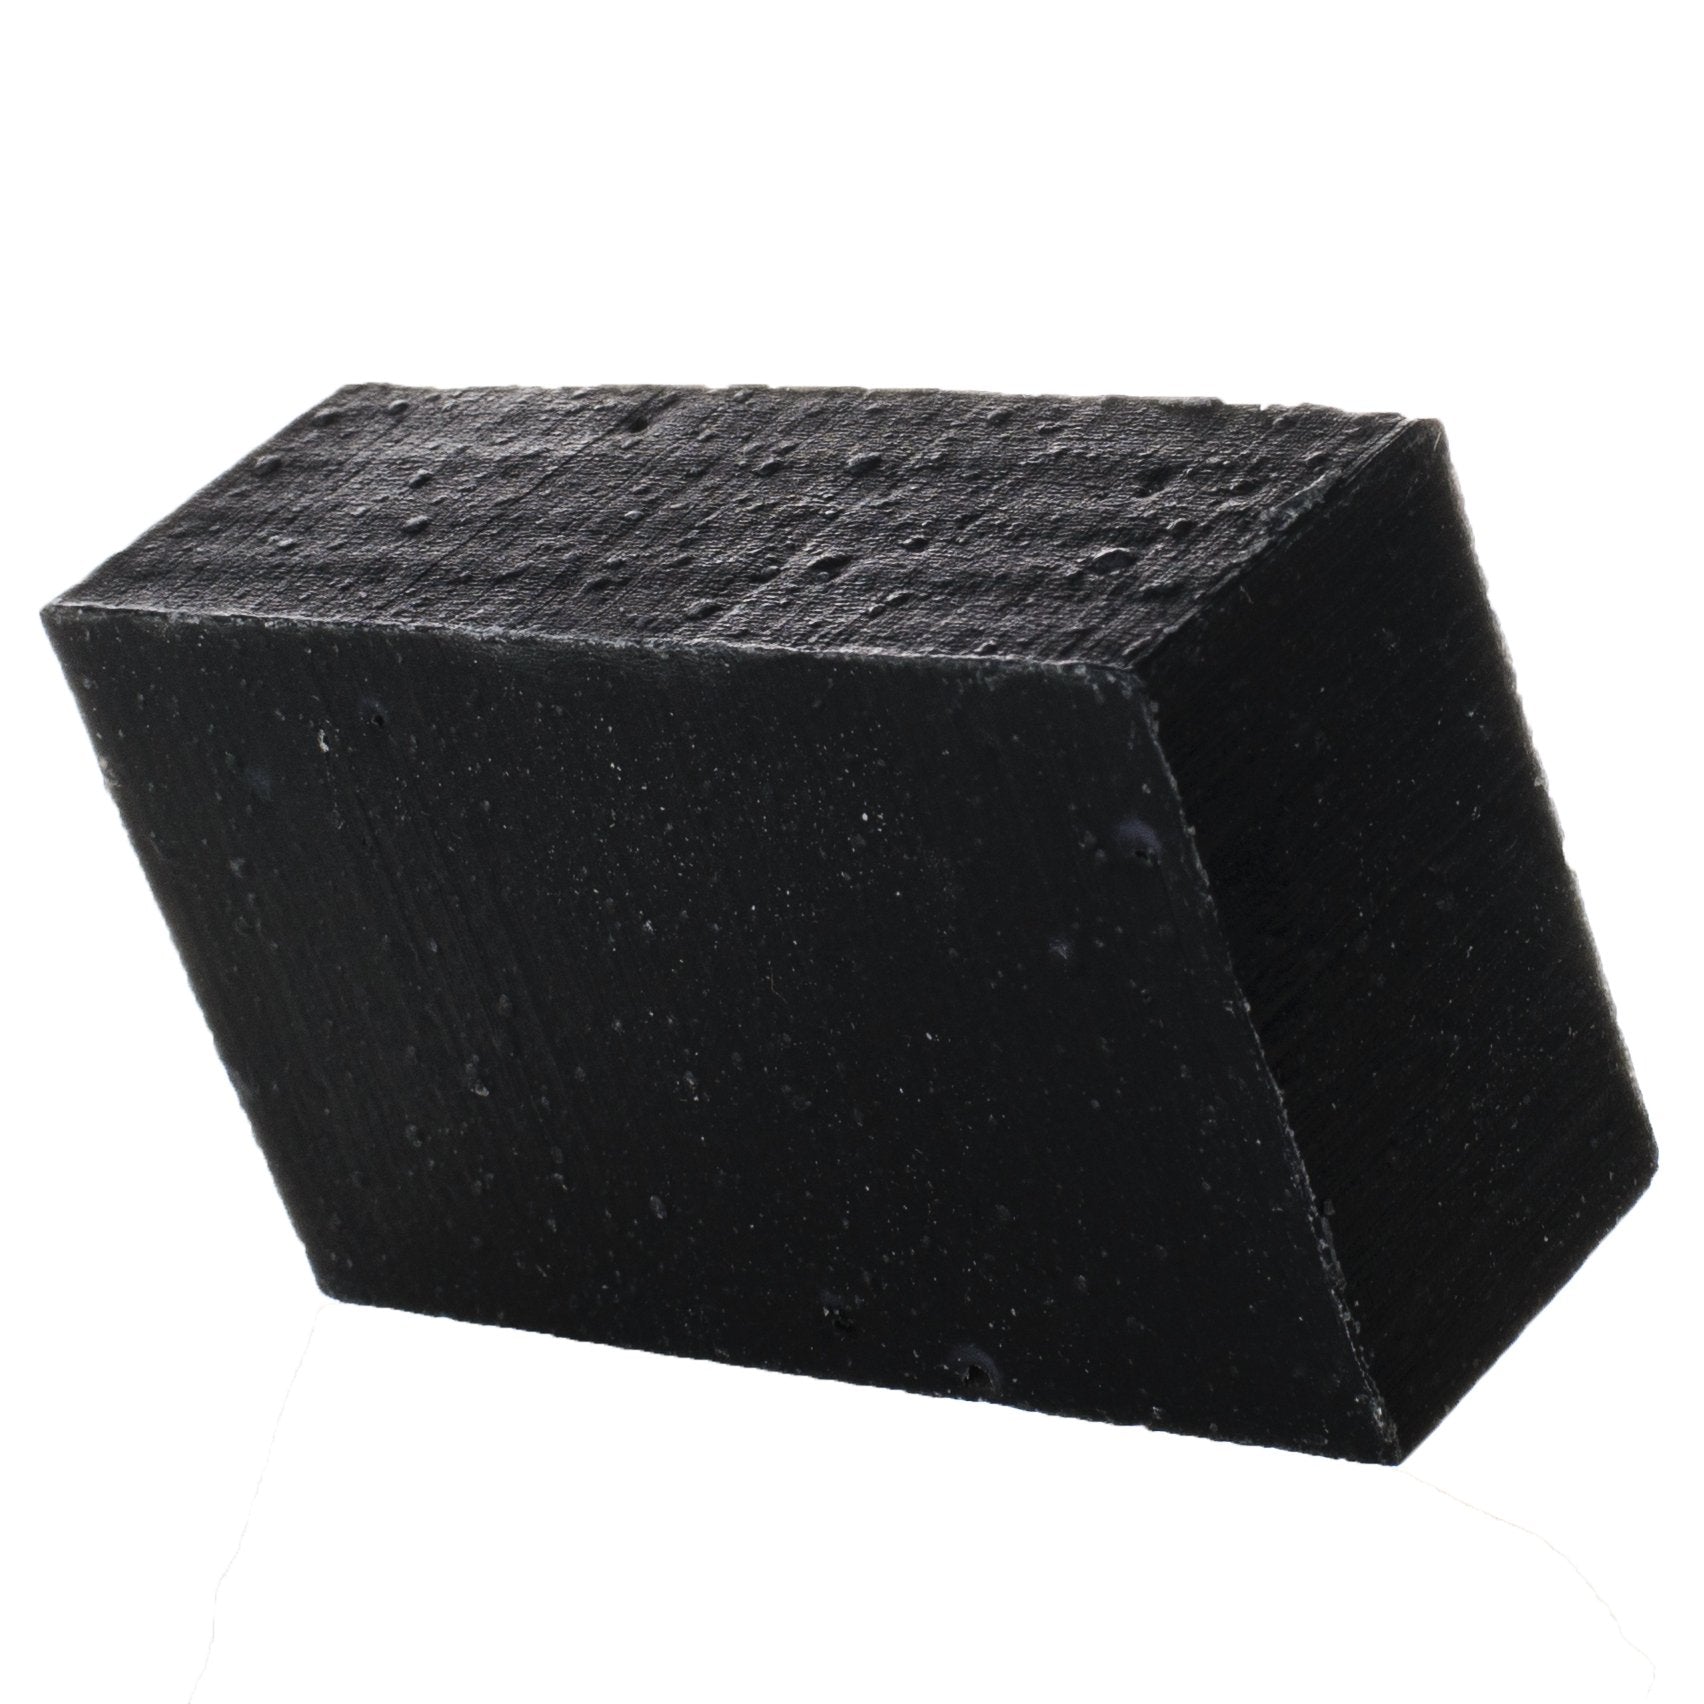 Cleansing Charcoal Soap